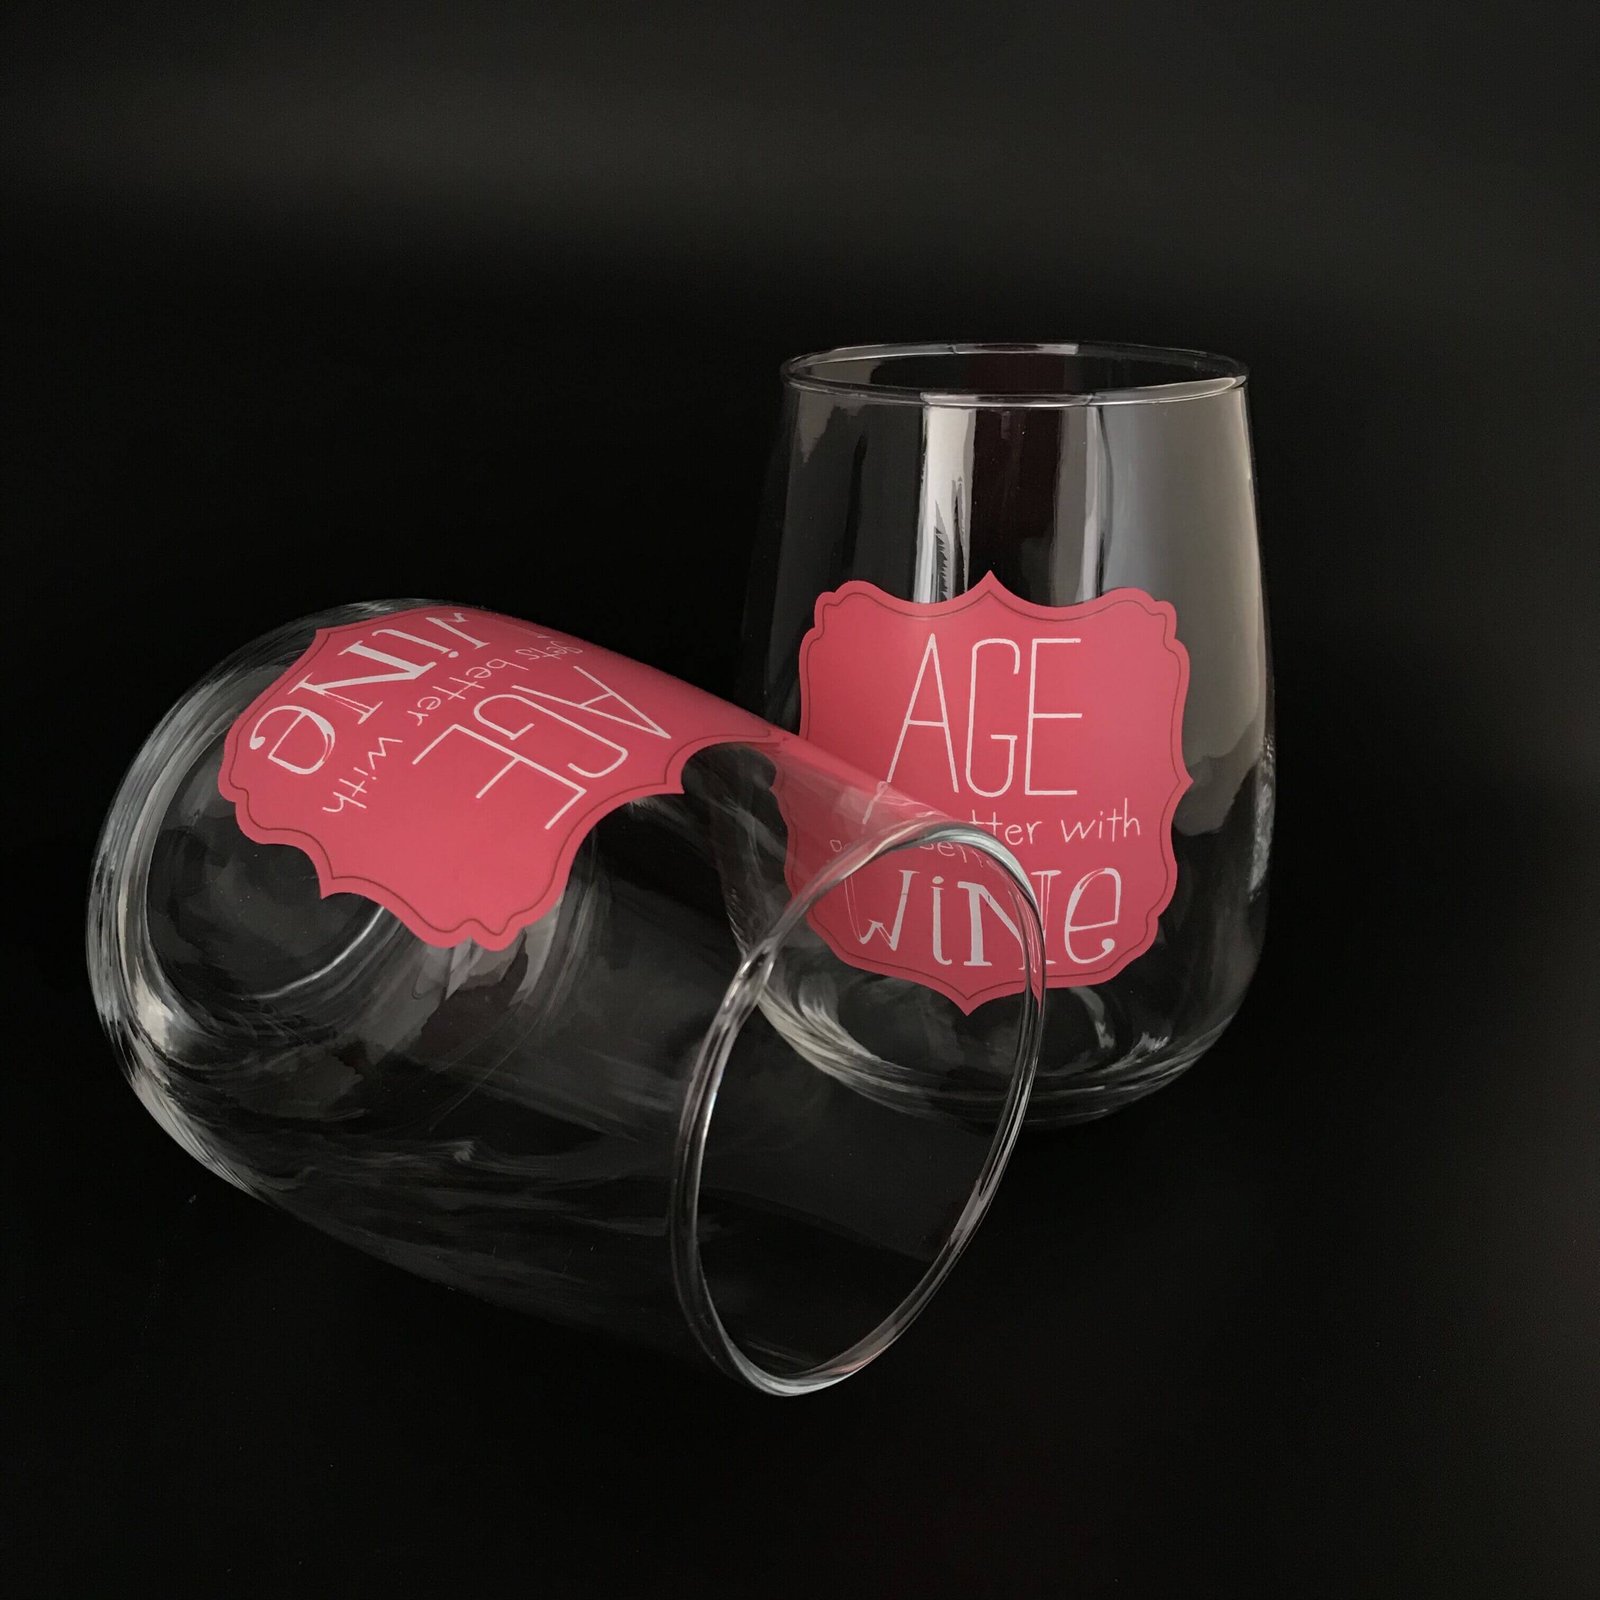 personalized stemless wine glasses